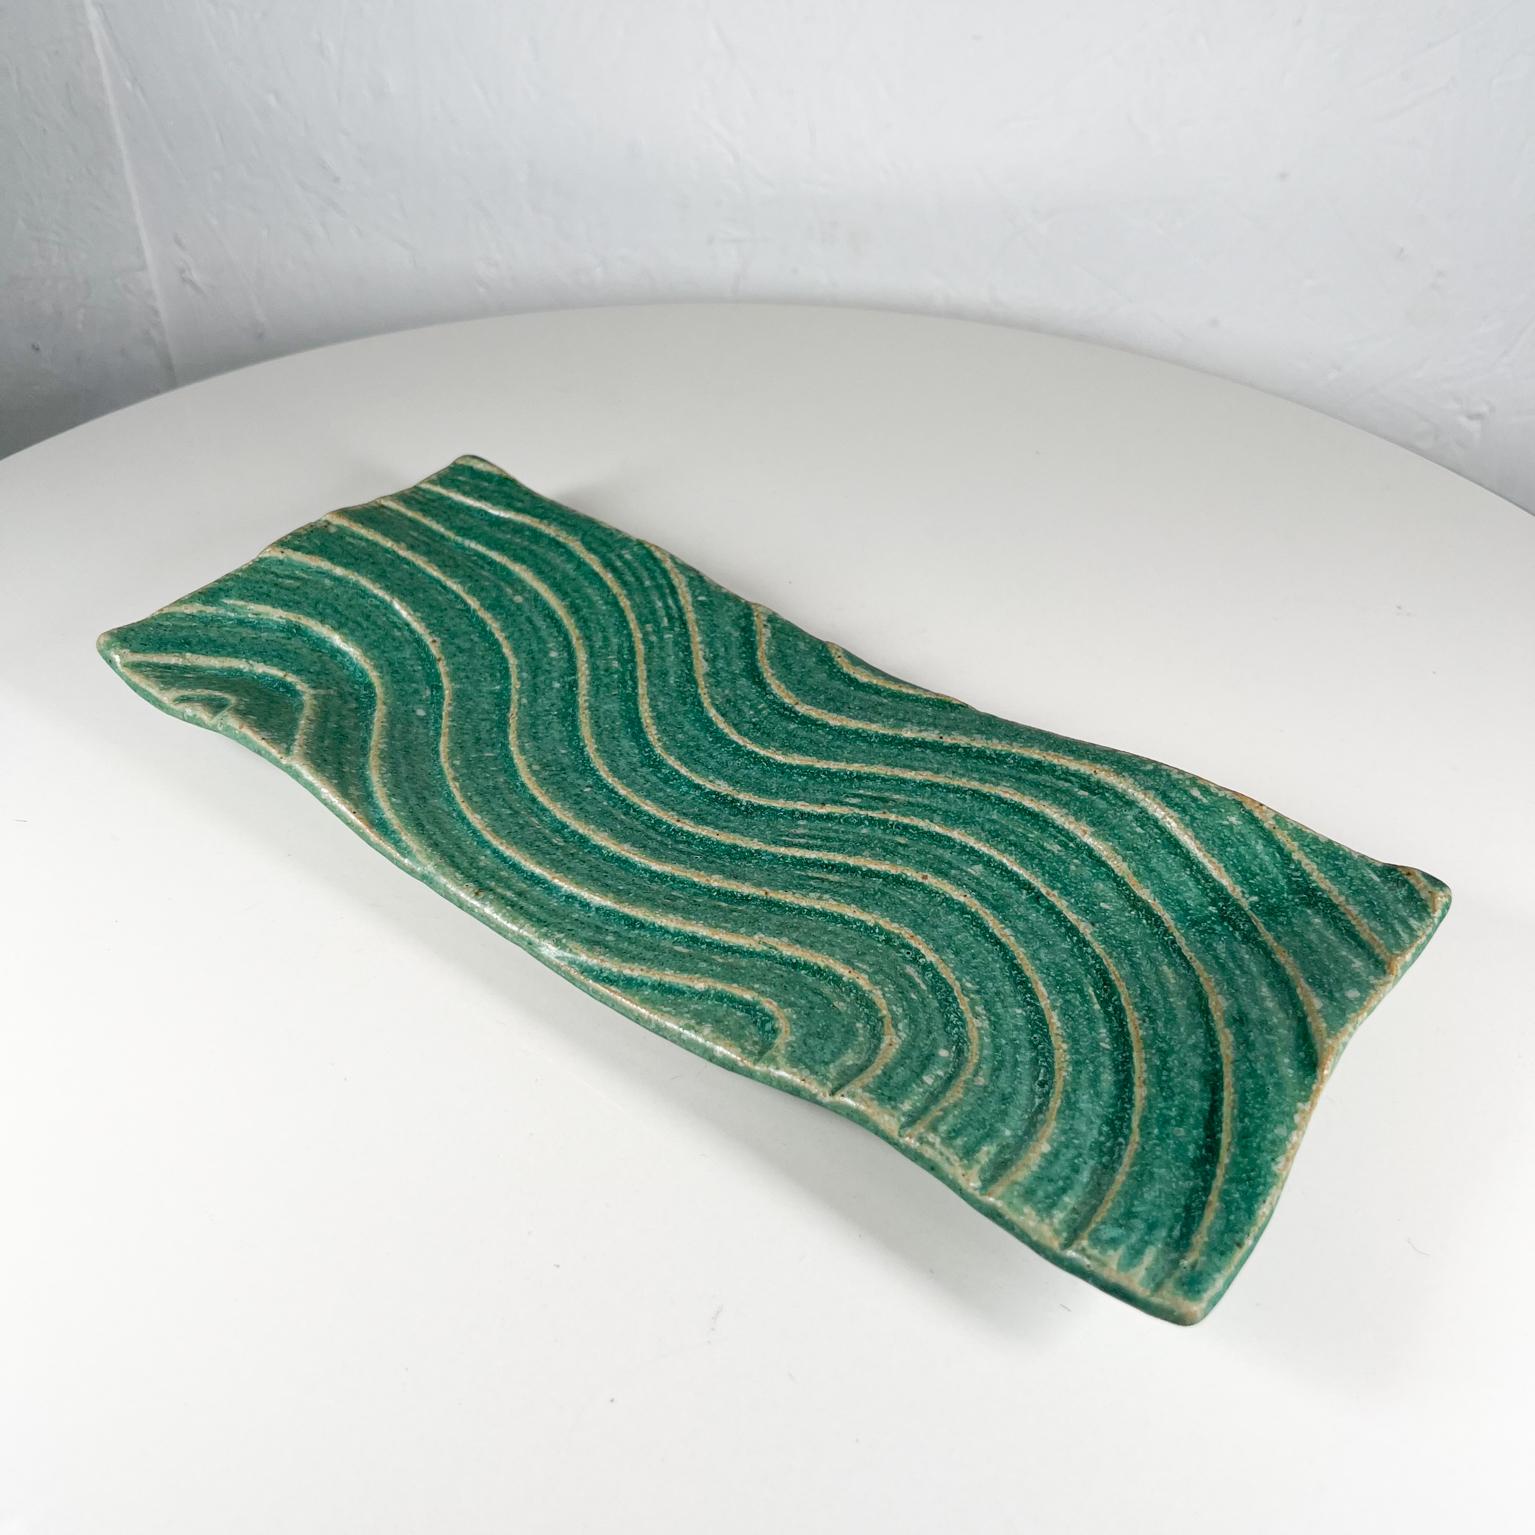 American 1970s Sculptural Green Wave Dish Studio Pottery Art Ed Thompson For Sale